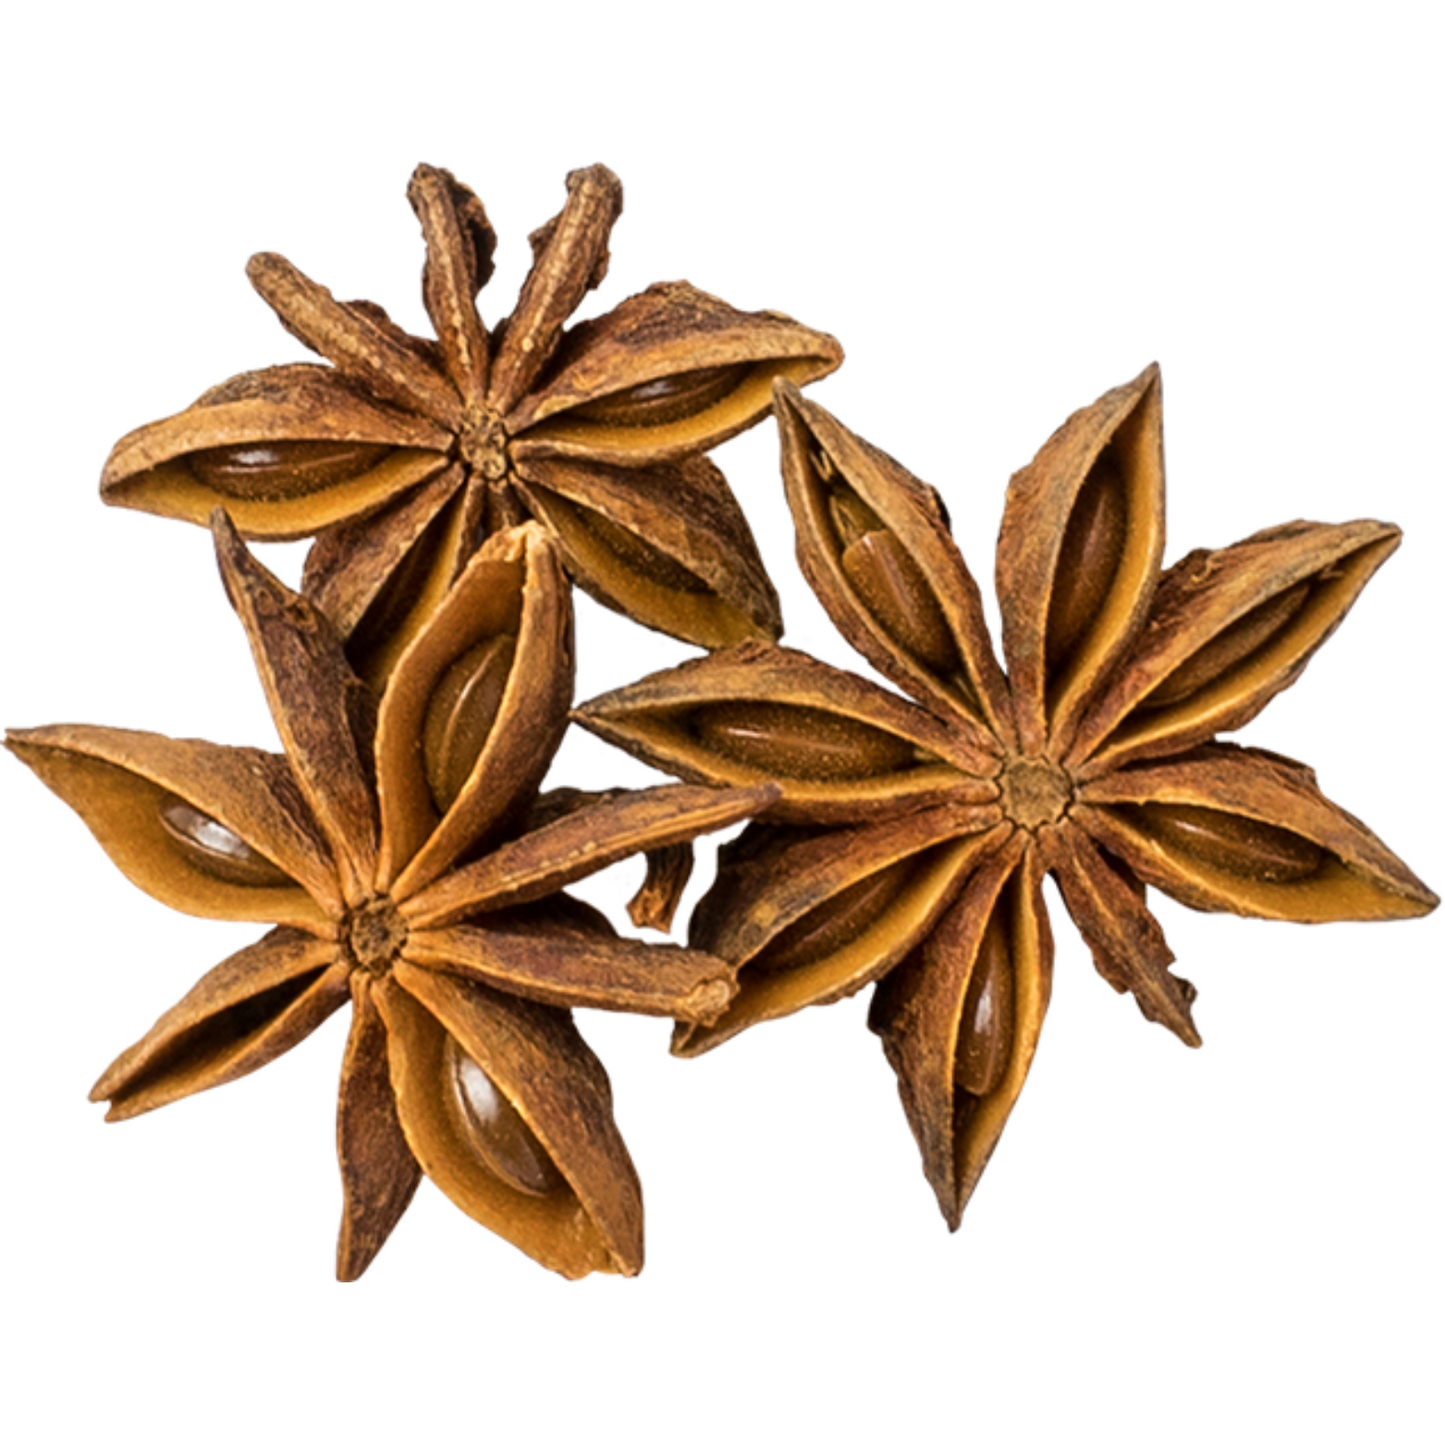 Anise Stars, Wole and Pieces, Dried Herbs, Food Grade Herbs, Herbs and Spices, Loose Leaf Herbs